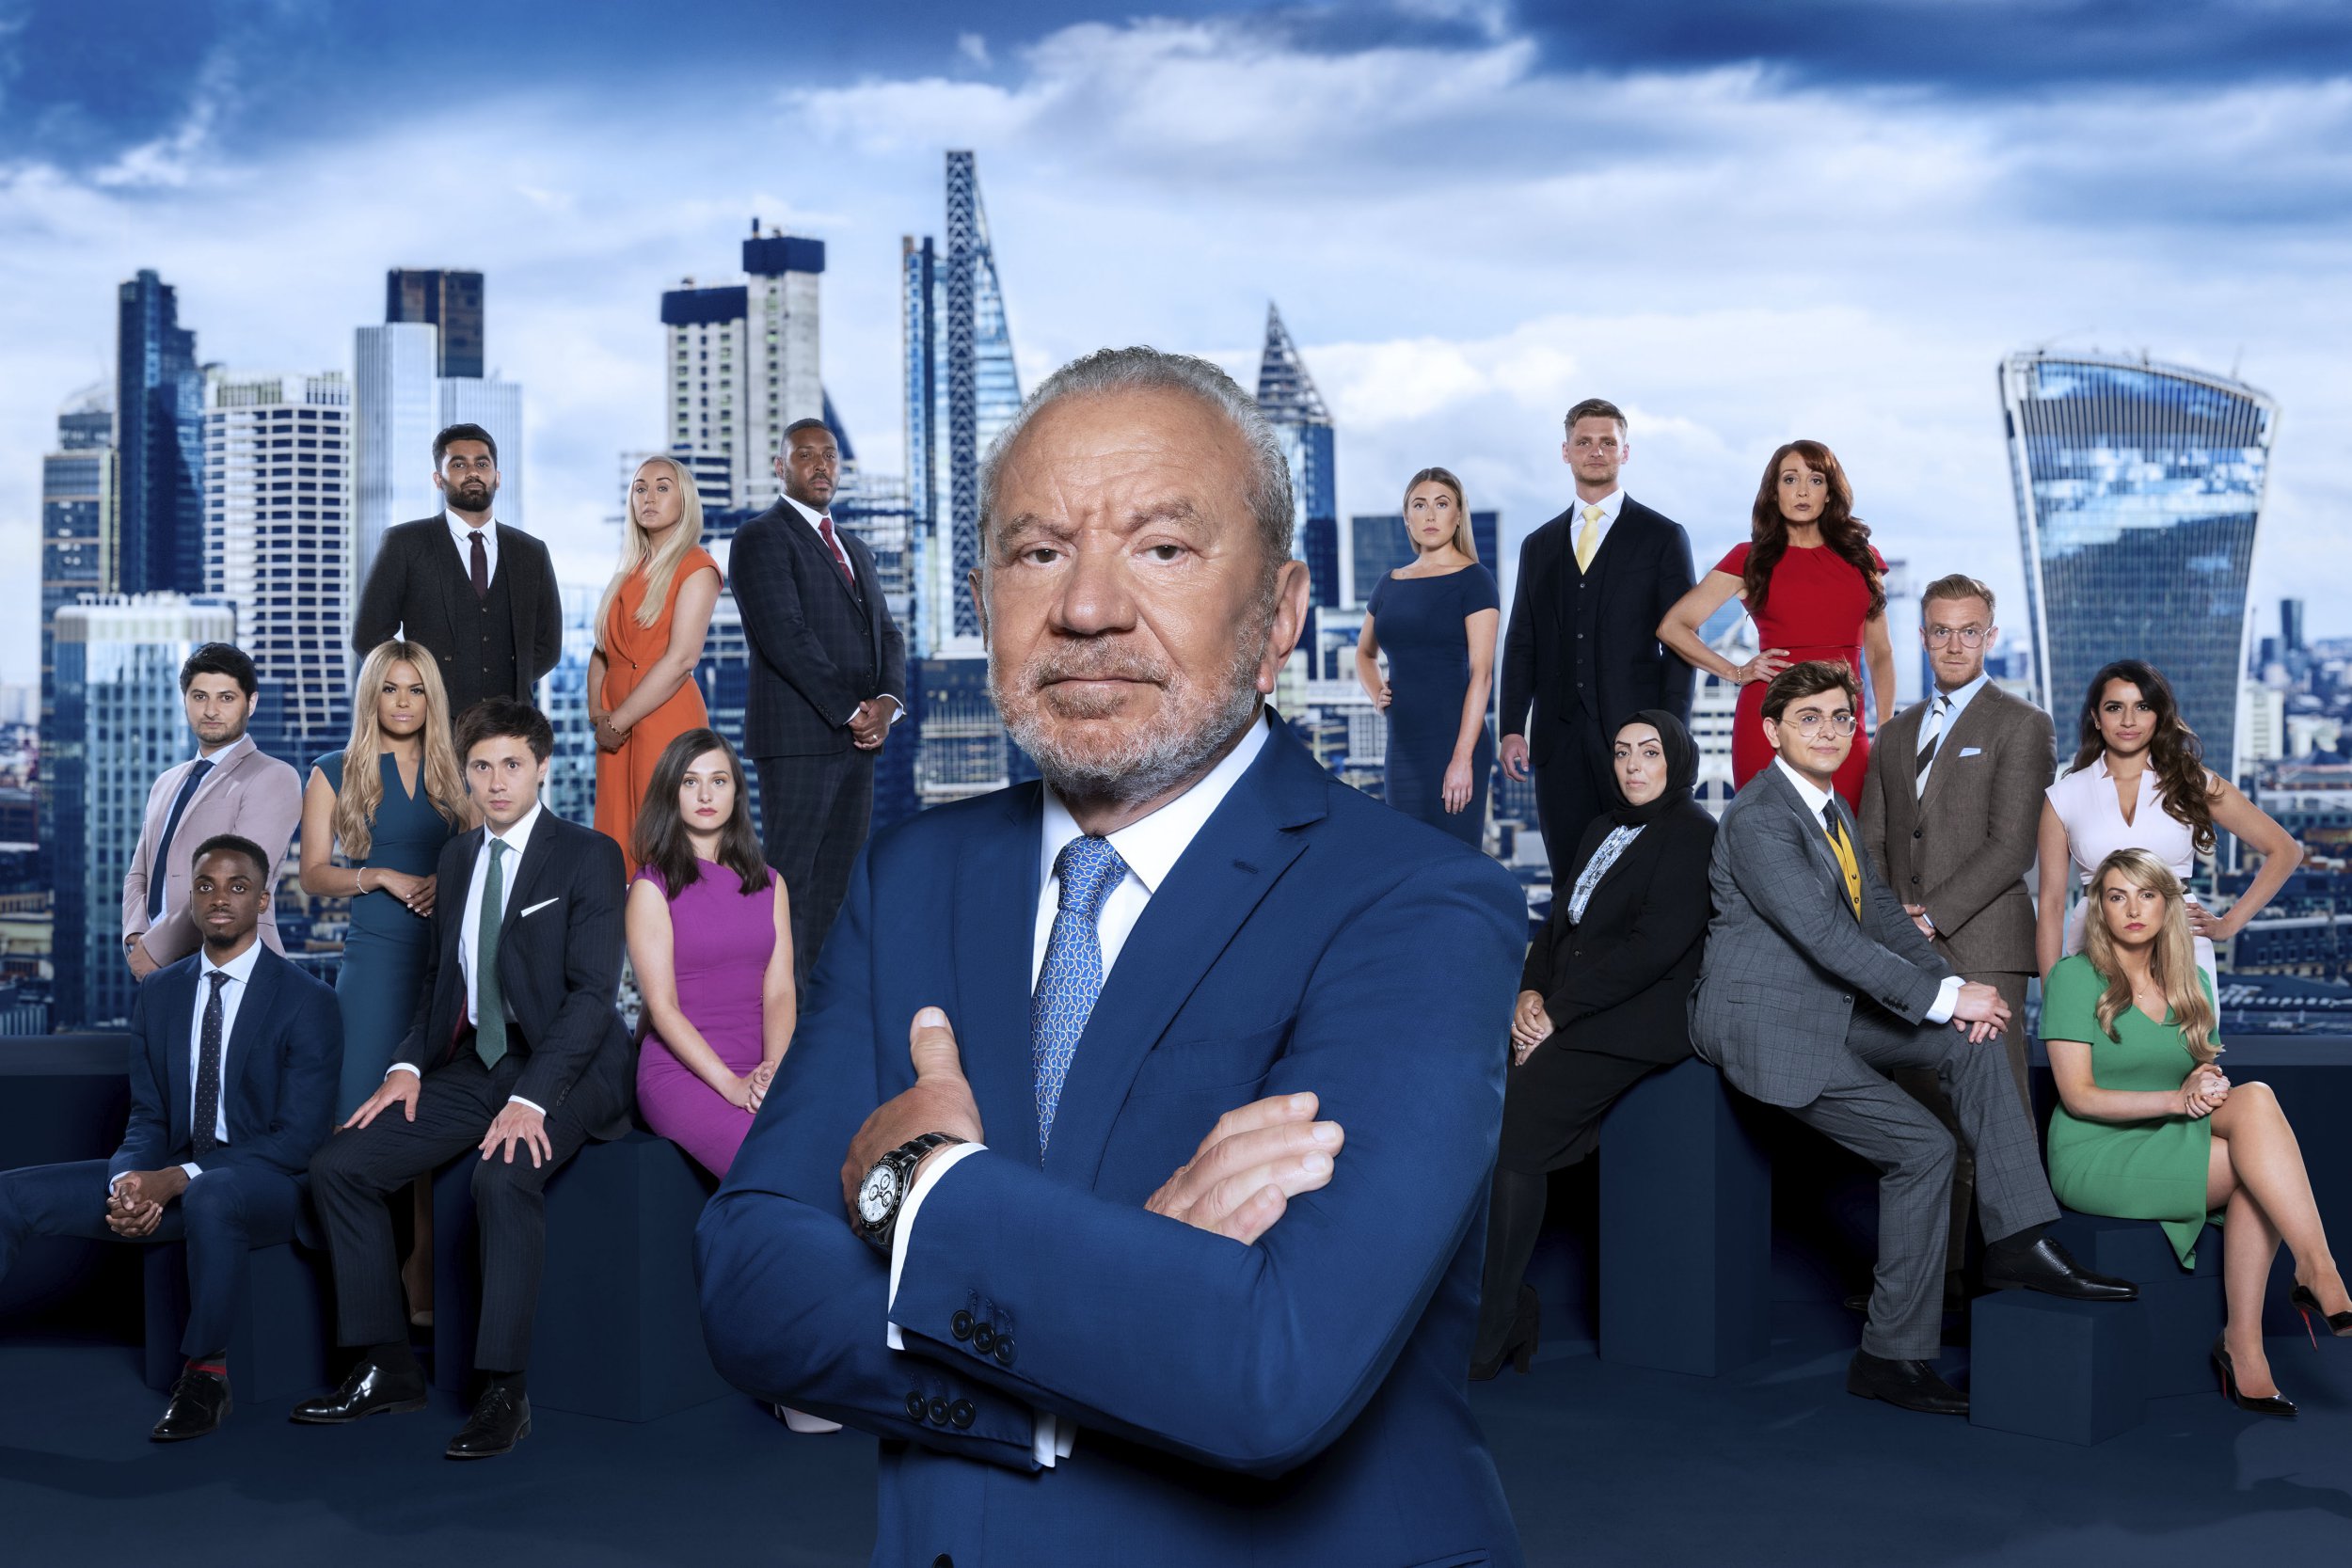 The Apprentice: Former star claims contestants were ‘ranked in order of attractiveness’ during audition process